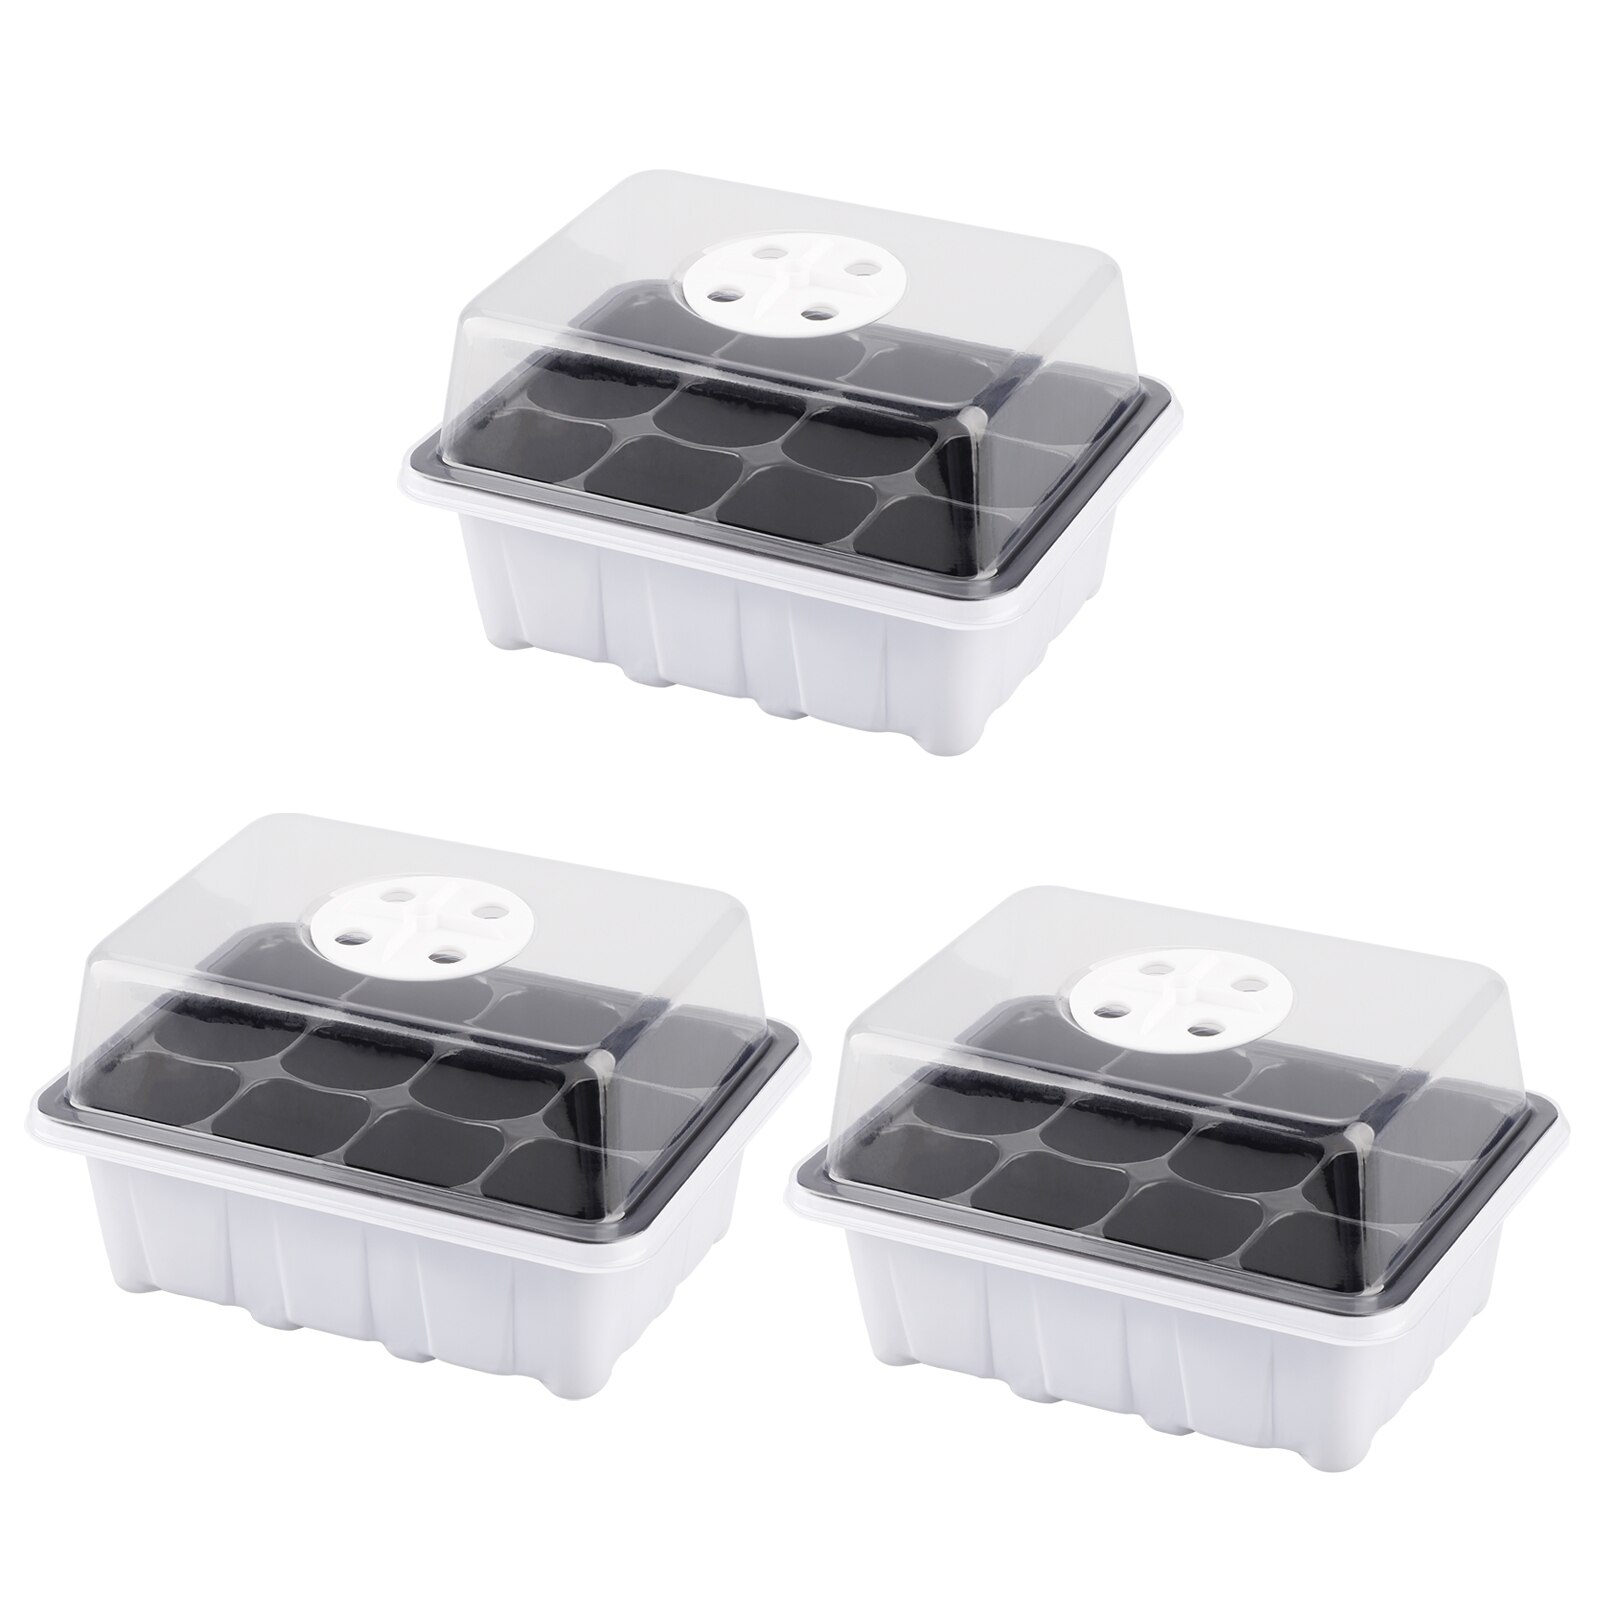 Seedling Box Seedling Propagation Kit Seedling Starter Tray Set Humidity Vented Domes Plant Lables 6 Cells Plant Growth Tray: White